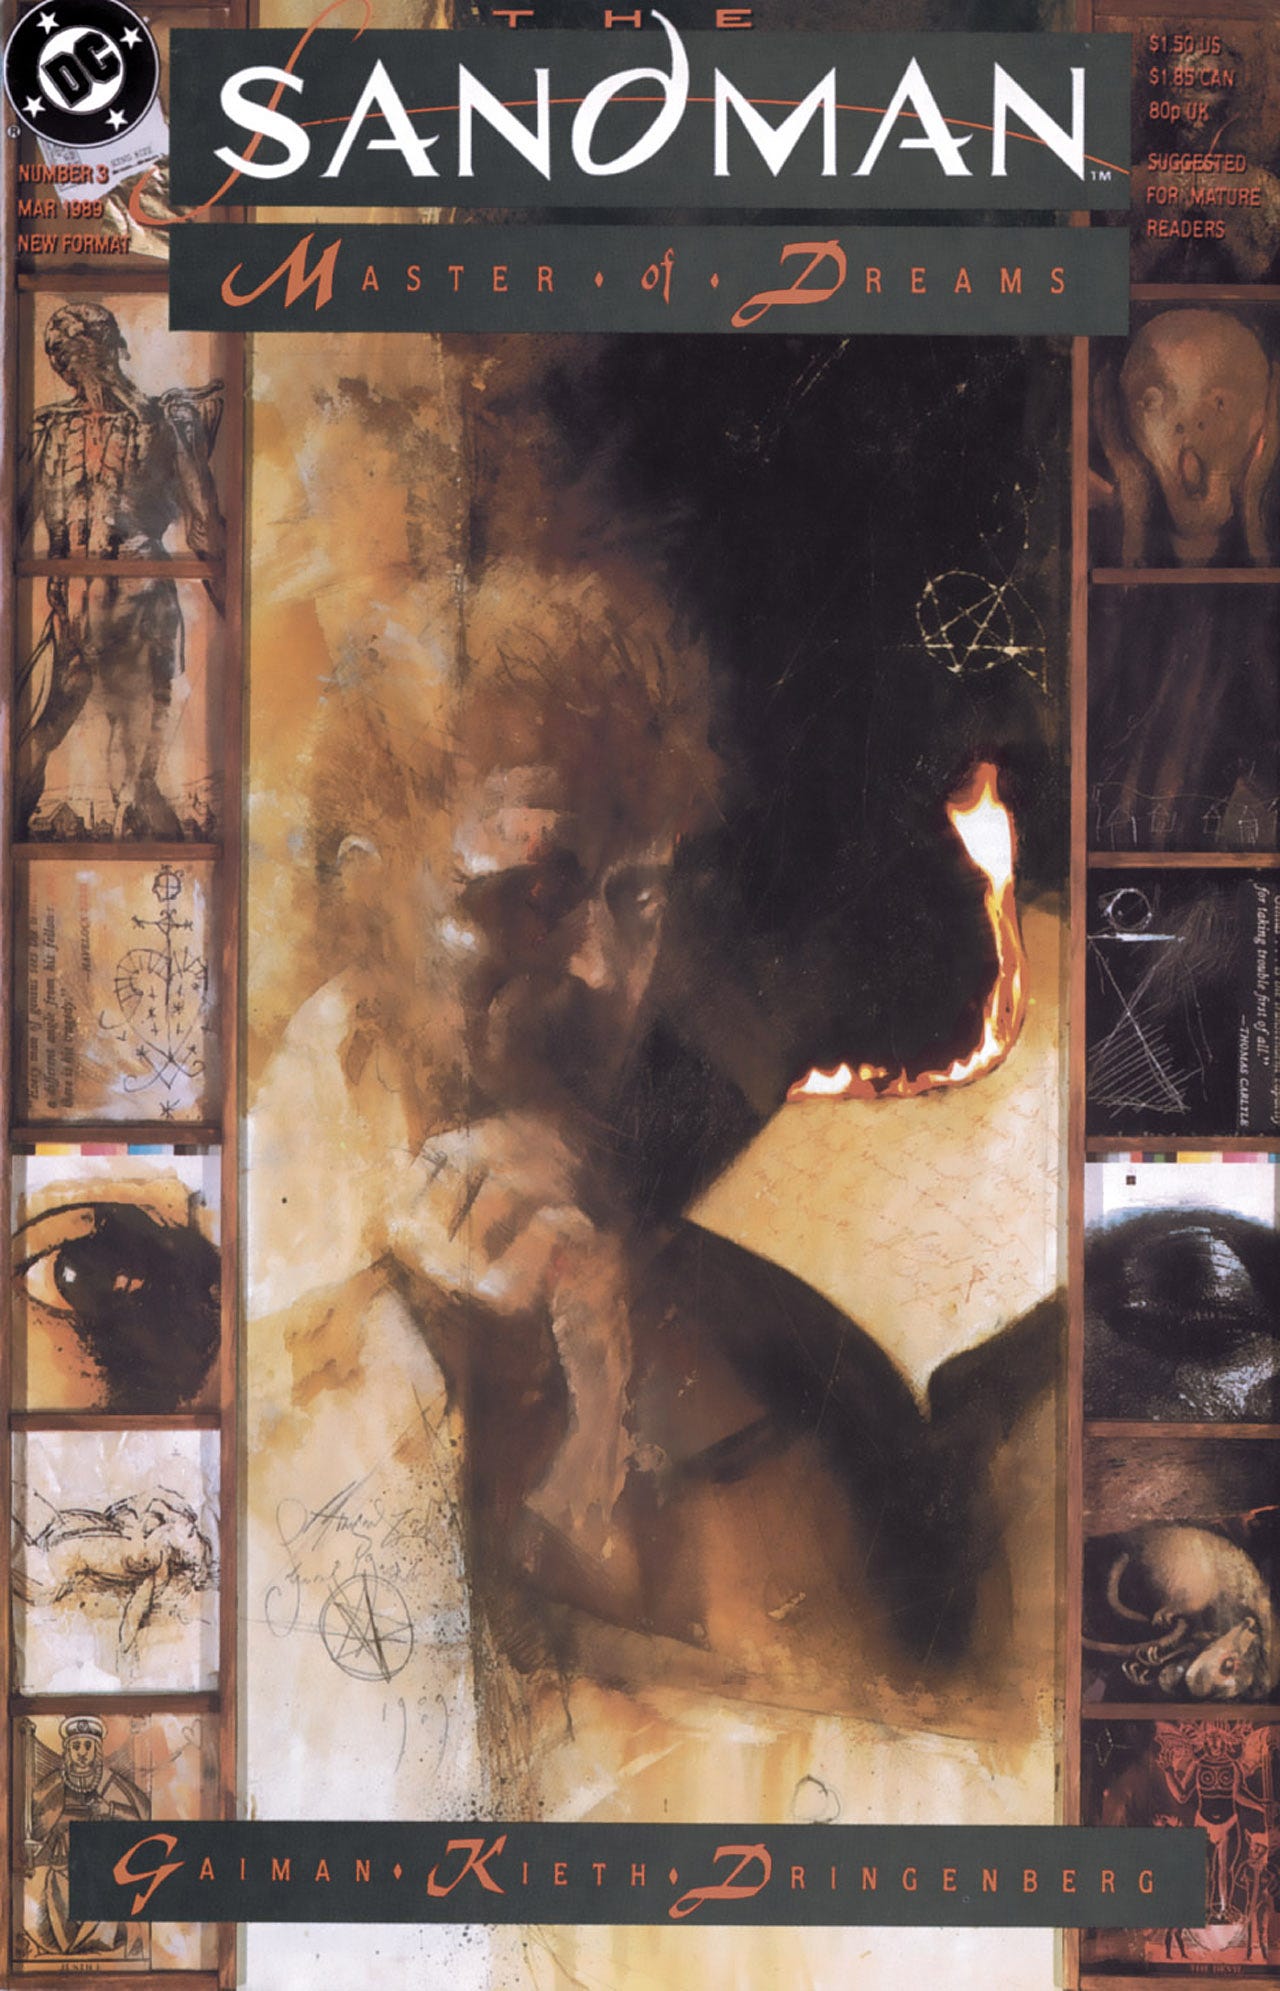 The cover of issue 3 of The Sandman with art by Dave McKean which depicts John Constantine